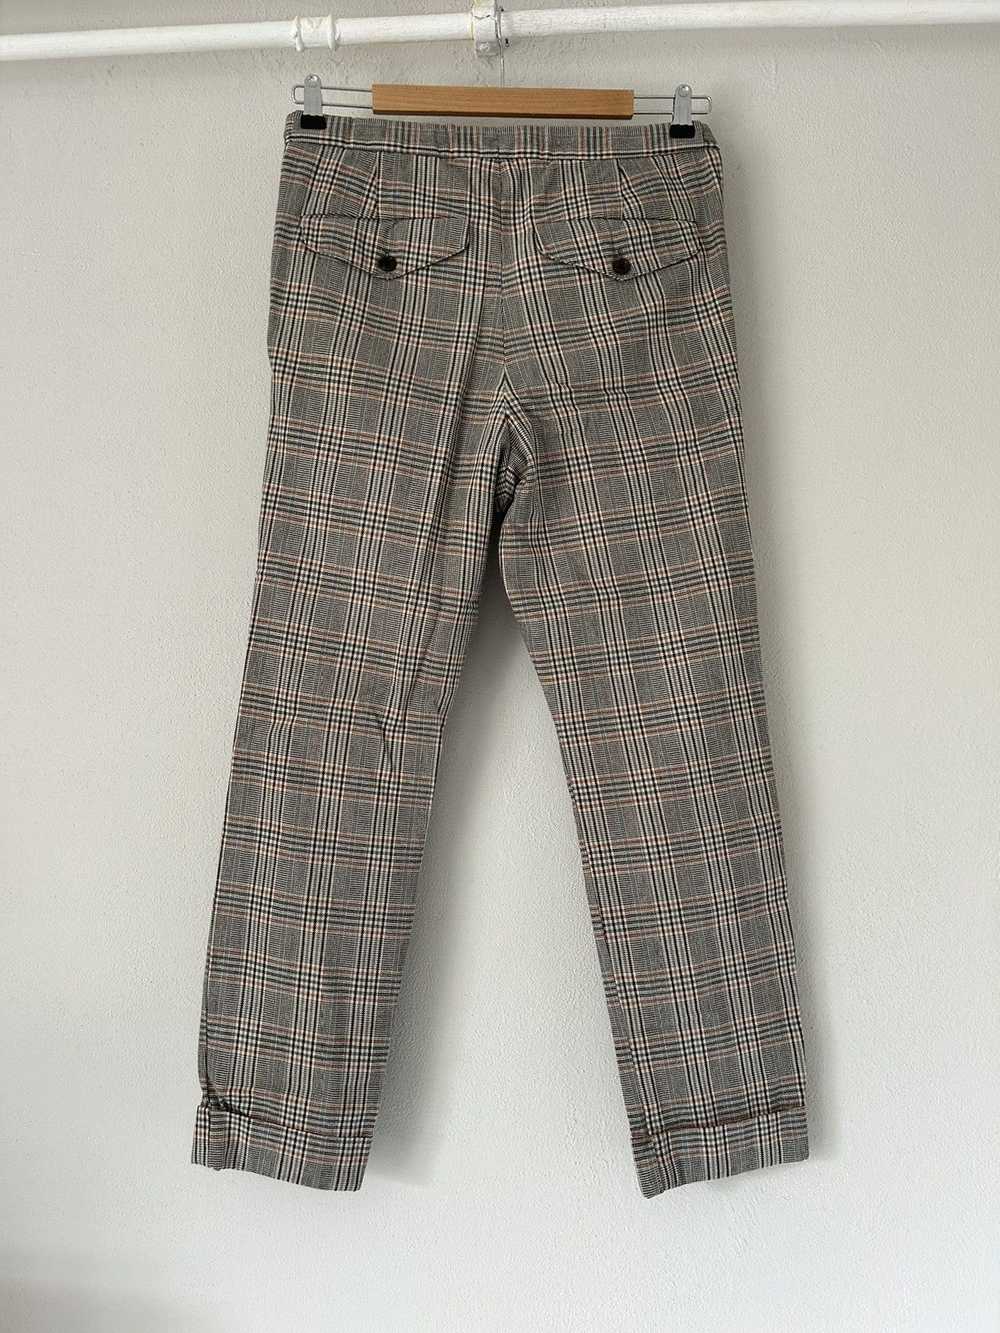 Gucci Checkered Plaid Trousers - image 7